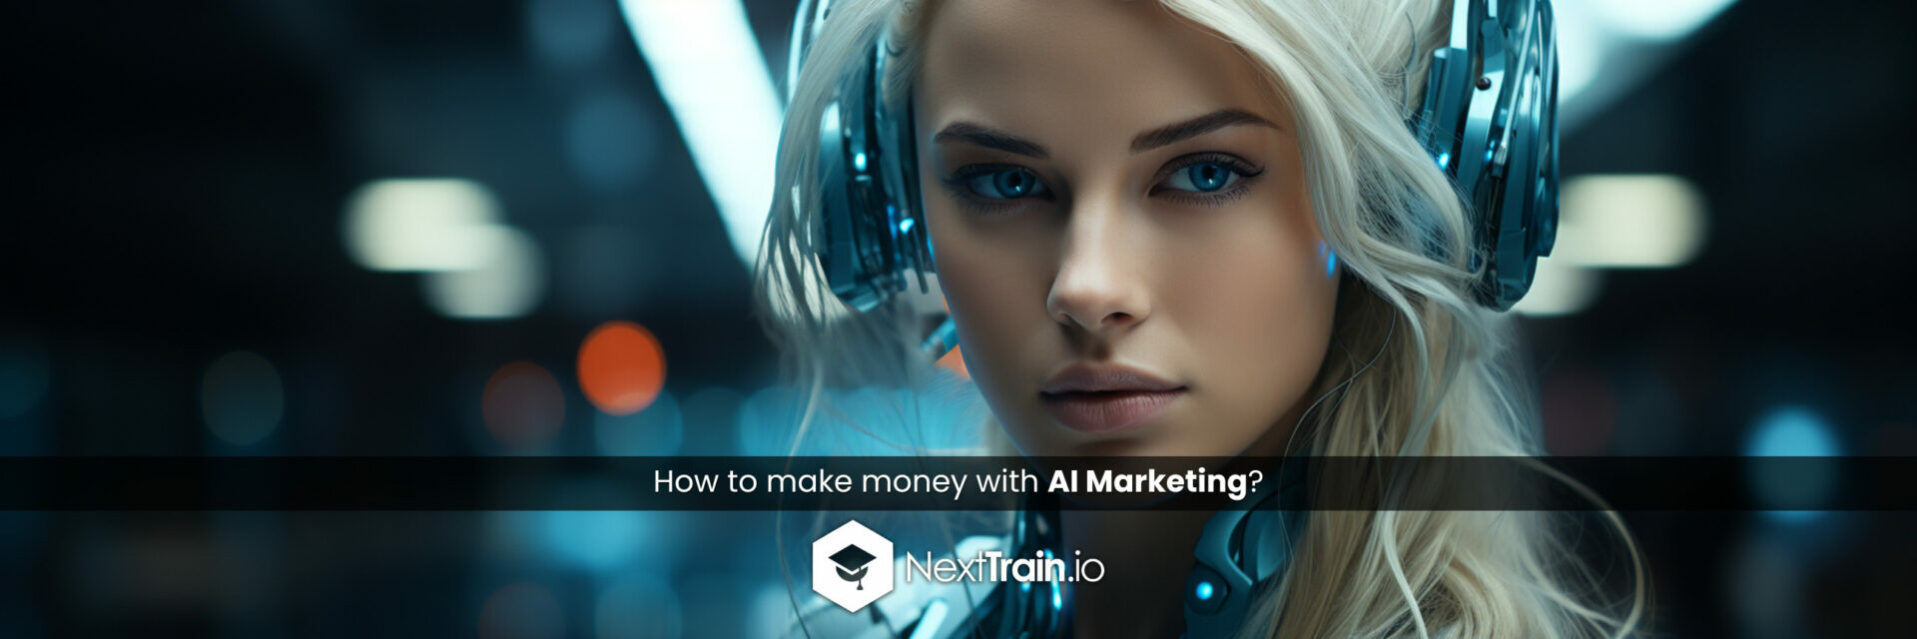 How to make money with AI Marketing?